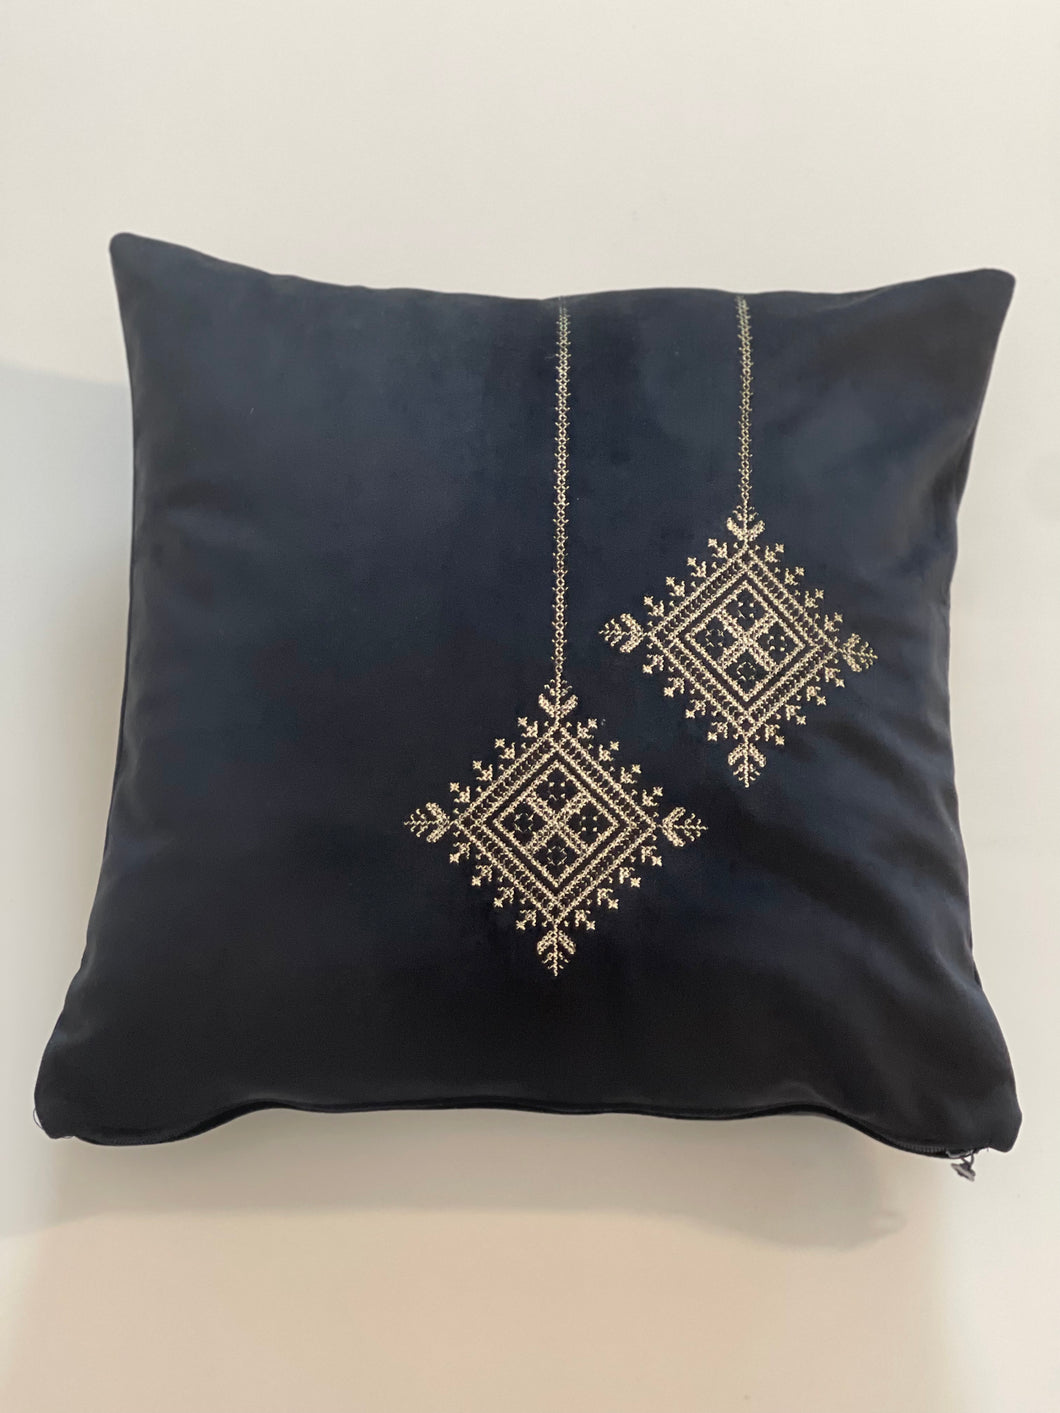 Traditional embroidered pillows